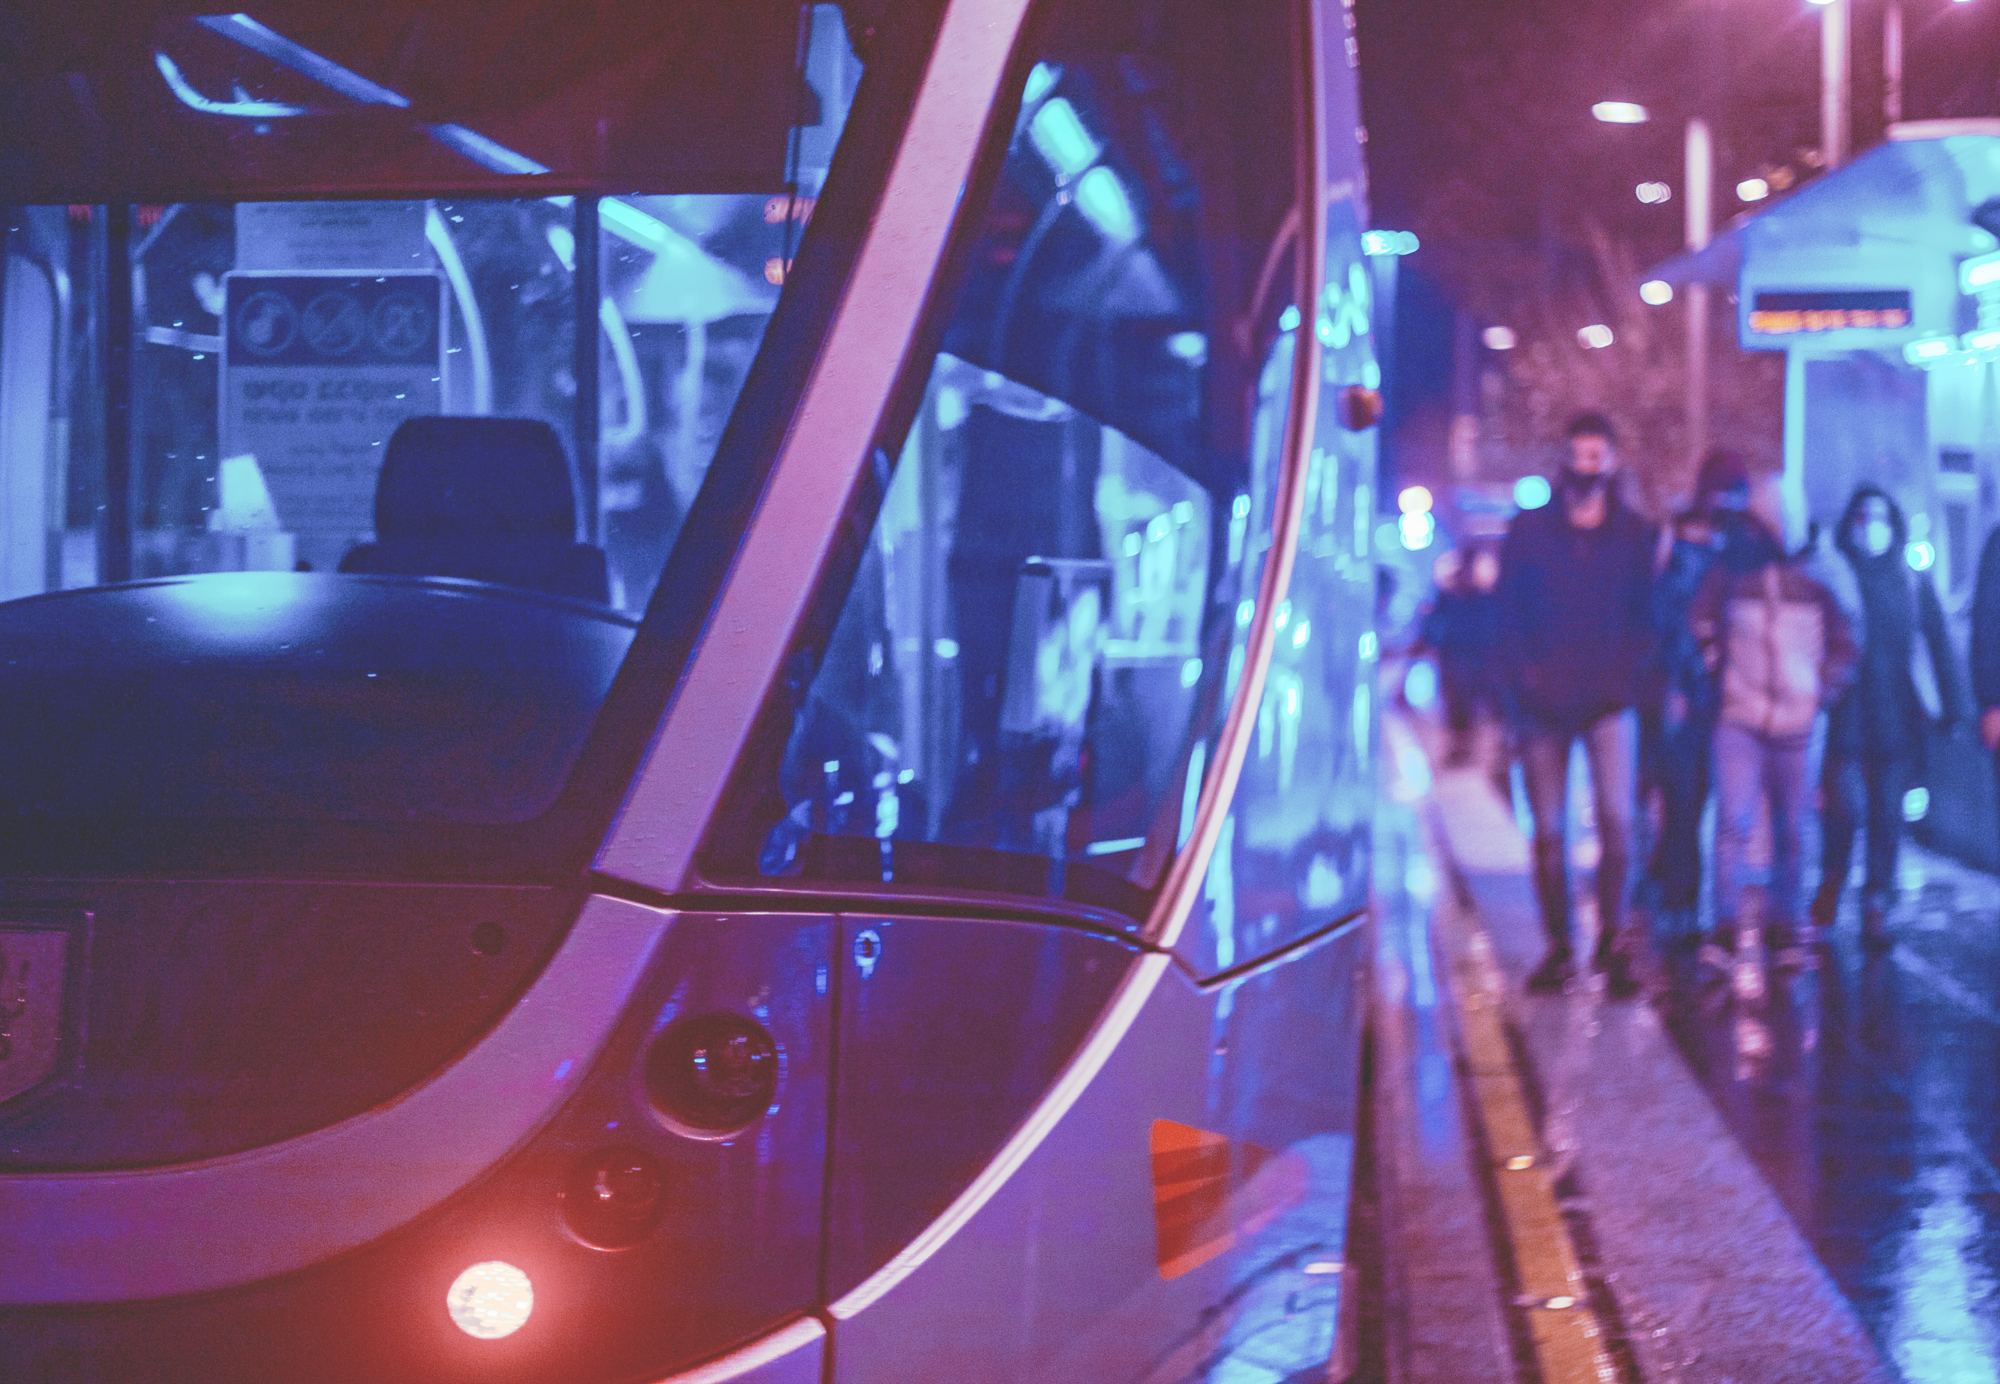 outdoor photo of public transportation and people at night with purple and blue lighting